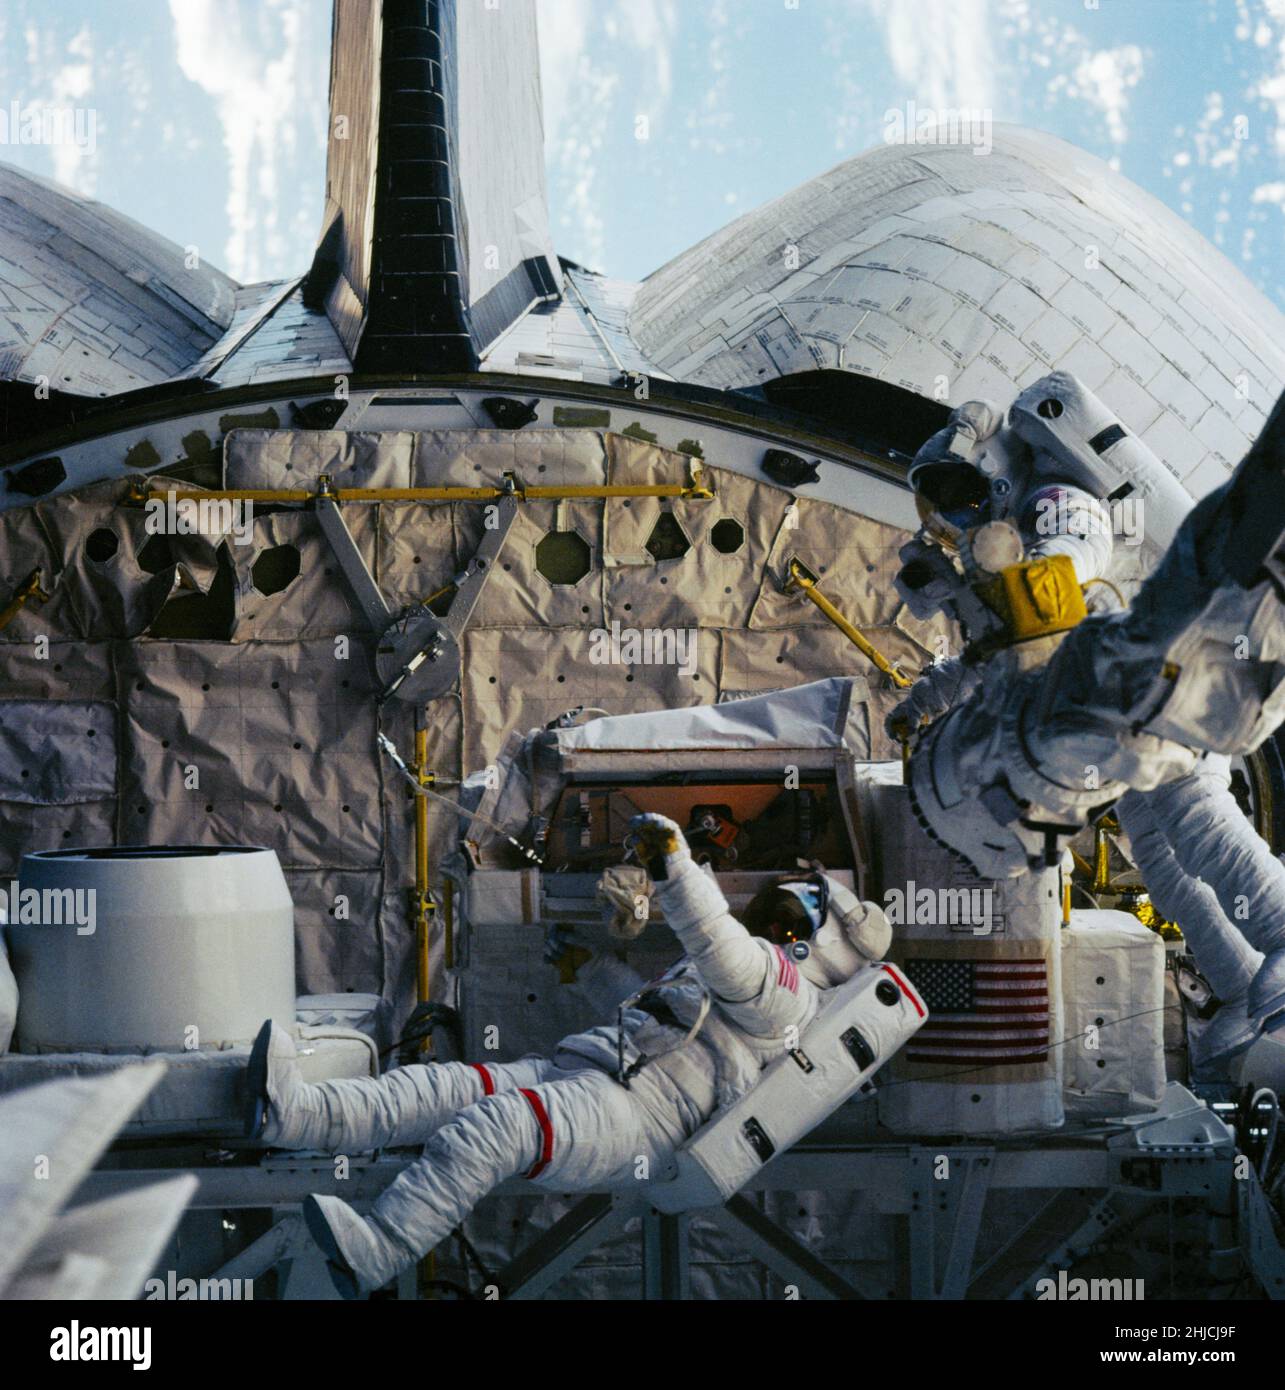 Photographed on October 11, 1984 through aft flight deck windows of the Space Shuttle Challenger, this 70mm frame shows Astronauts David C. Leestma, left, and Kathryn D. Sullivan at the orbital refueling system (ORS) in the aft cargo bay. Dr. Sullivan's part of the extravehicular activity (EVA) represented the first such feat for an American woman. Stock Photo